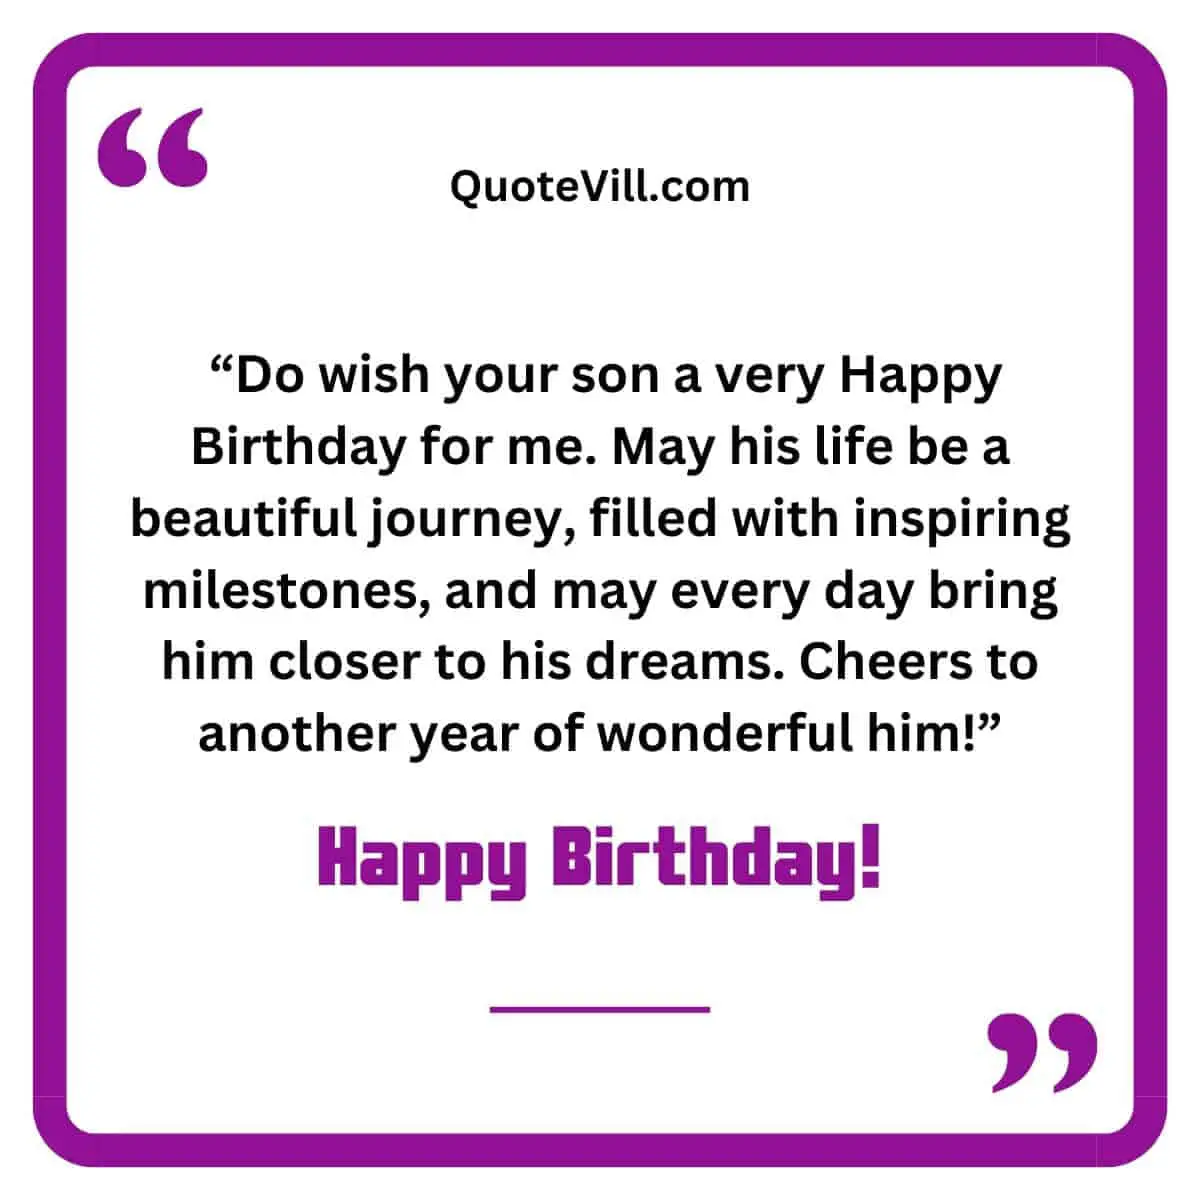 Convey-My-Birthday-Wishes-To-Your-Son